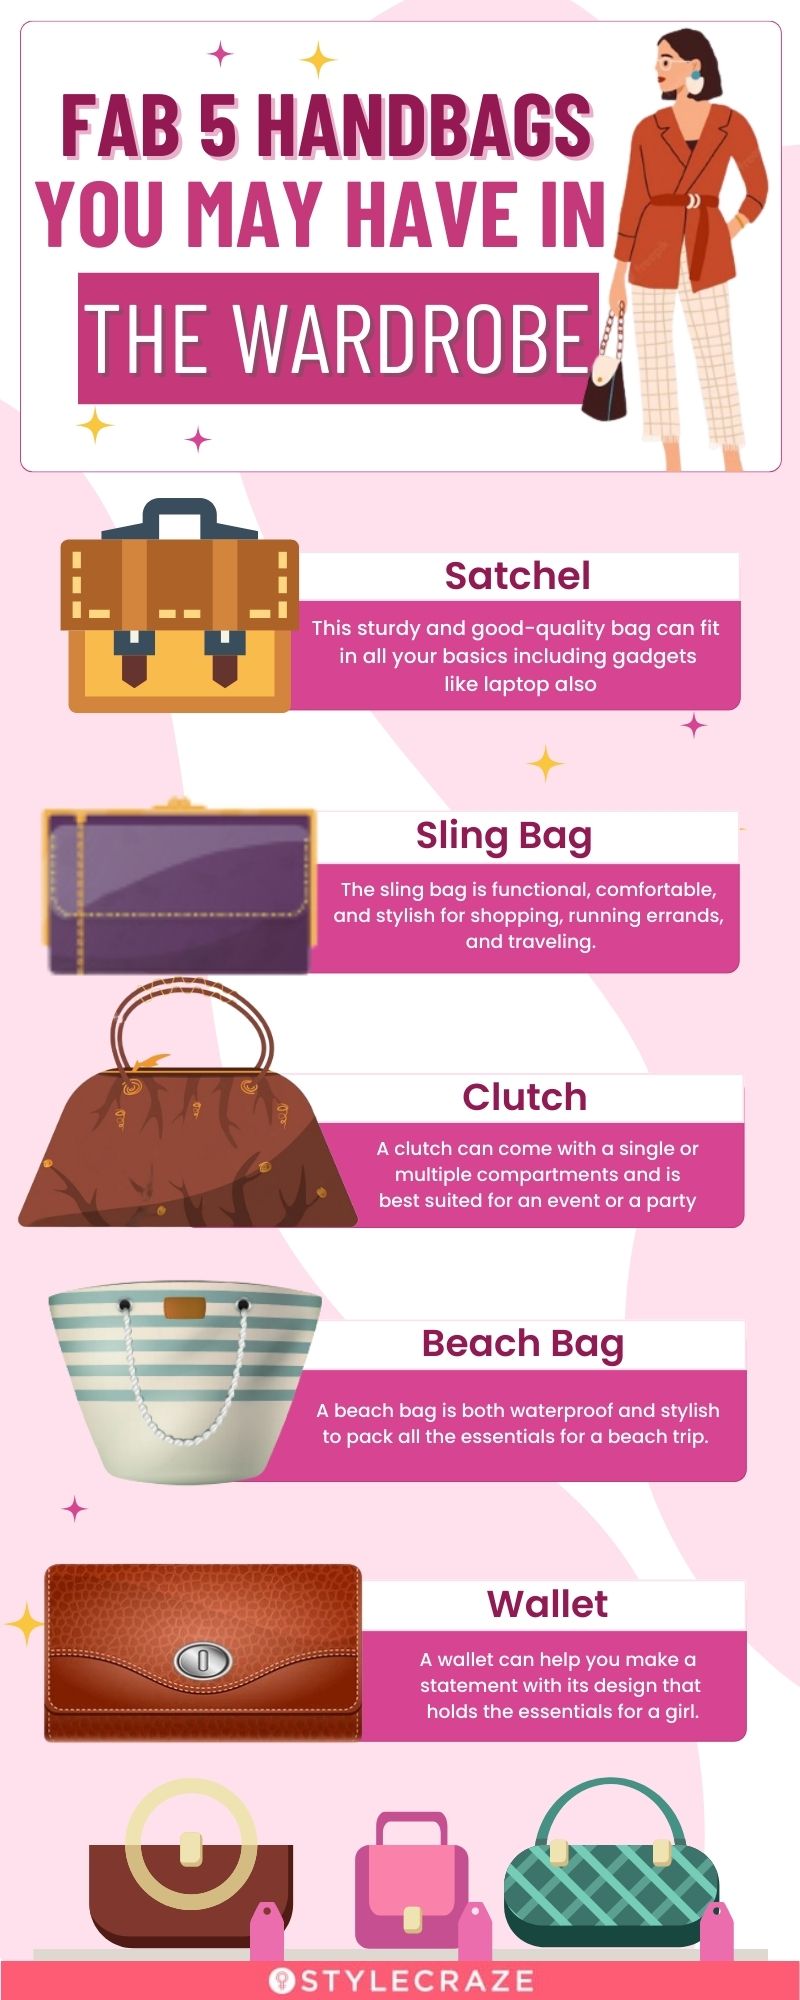 fab 5 handbags you may have in the wardrobe (infographic)